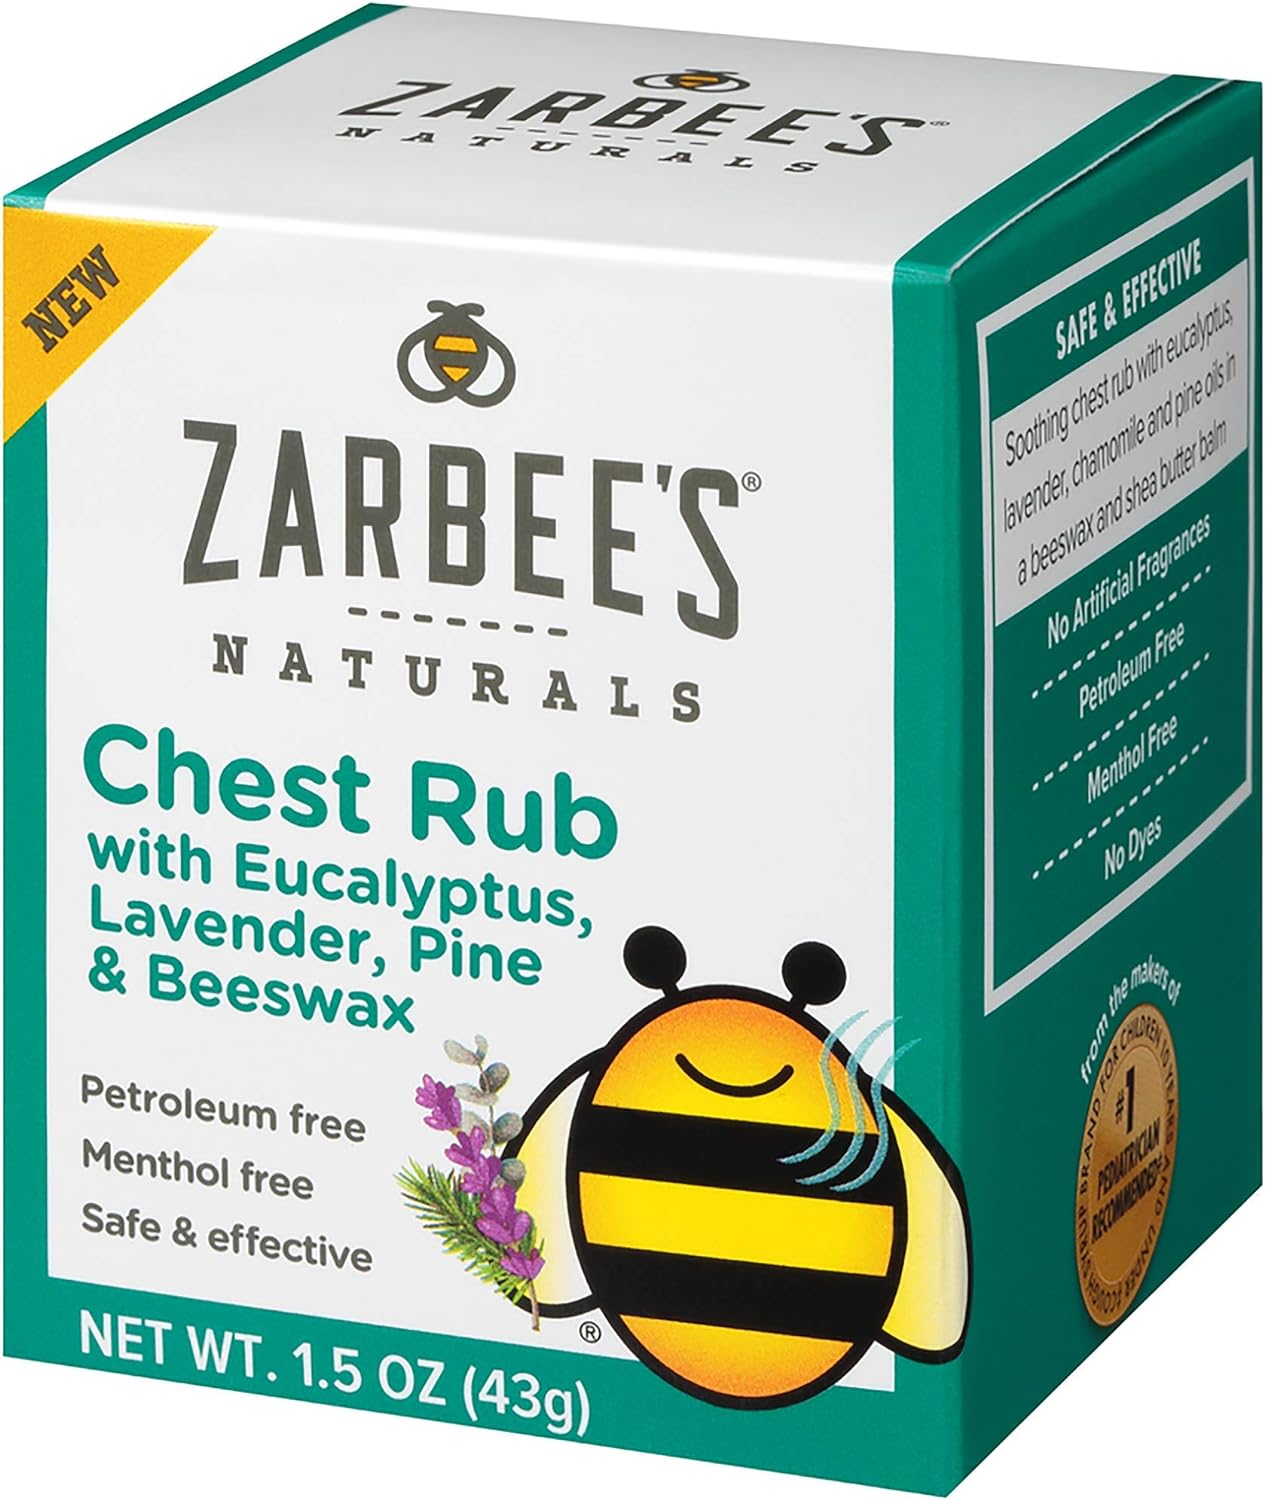 Zarbee's Baby Soothing Chest Rub with Eucalyptus & Lavender, Petroleum-Free Safe and Effective Formula, 1.5 Ounce